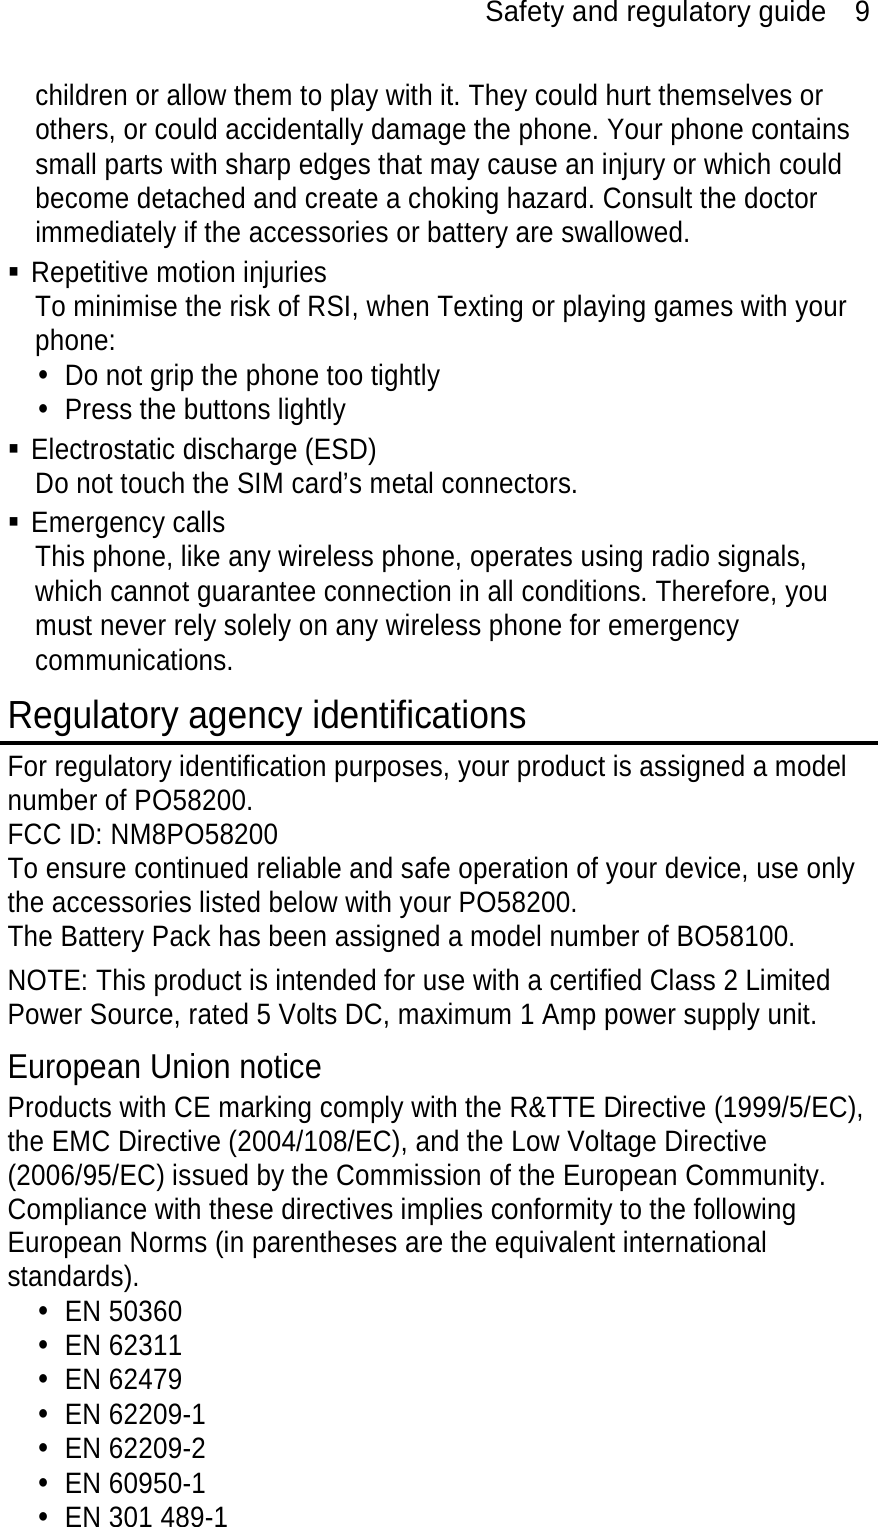 Safety and regulatory guide    9 children or allow them to play with it. They could hurt themselves or others, or could accidentally damage the phone. Your phone contains small parts with sharp edges that may cause an injury or which could become detached and create a choking hazard. Consult the doctor immediately if the accessories or battery are swallowed.  Repetitive motion injuries To minimise the risk of RSI, when Texting or playing games with your phone: y  Do not grip the phone too tightly y  Press the buttons lightly  Electrostatic discharge (ESD) Do not touch the SIM card’s metal connectors.    Emergency calls This phone, like any wireless phone, operates using radio signals, which cannot guarantee connection in all conditions. Therefore, you must never rely solely on any wireless phone for emergency communications. Regulatory agency identifications For regulatory identification purposes, your product is assigned a model number of PO58200. FCC ID: NM8PO58200 To ensure continued reliable and safe operation of your device, use only the accessories listed below with your PO58200. The Battery Pack has been assigned a model number of BO58100. NOTE: This product is intended for use with a certified Class 2 Limited Power Source, rated 5 Volts DC, maximum 1 Amp power supply unit. European Union notice Products with CE marking comply with the R&amp;TTE Directive (1999/5/EC), the EMC Directive (2004/108/EC), and the Low Voltage Directive (2006/95/EC) issued by the Commission of the European Community.   Compliance with these directives implies conformity to the following European Norms (in parentheses are the equivalent international standards). y EN 50360  y EN 62311 y EN 62479 y EN 62209-1 y EN 62209-2 y EN 60950-1 y  EN 301 489-1 